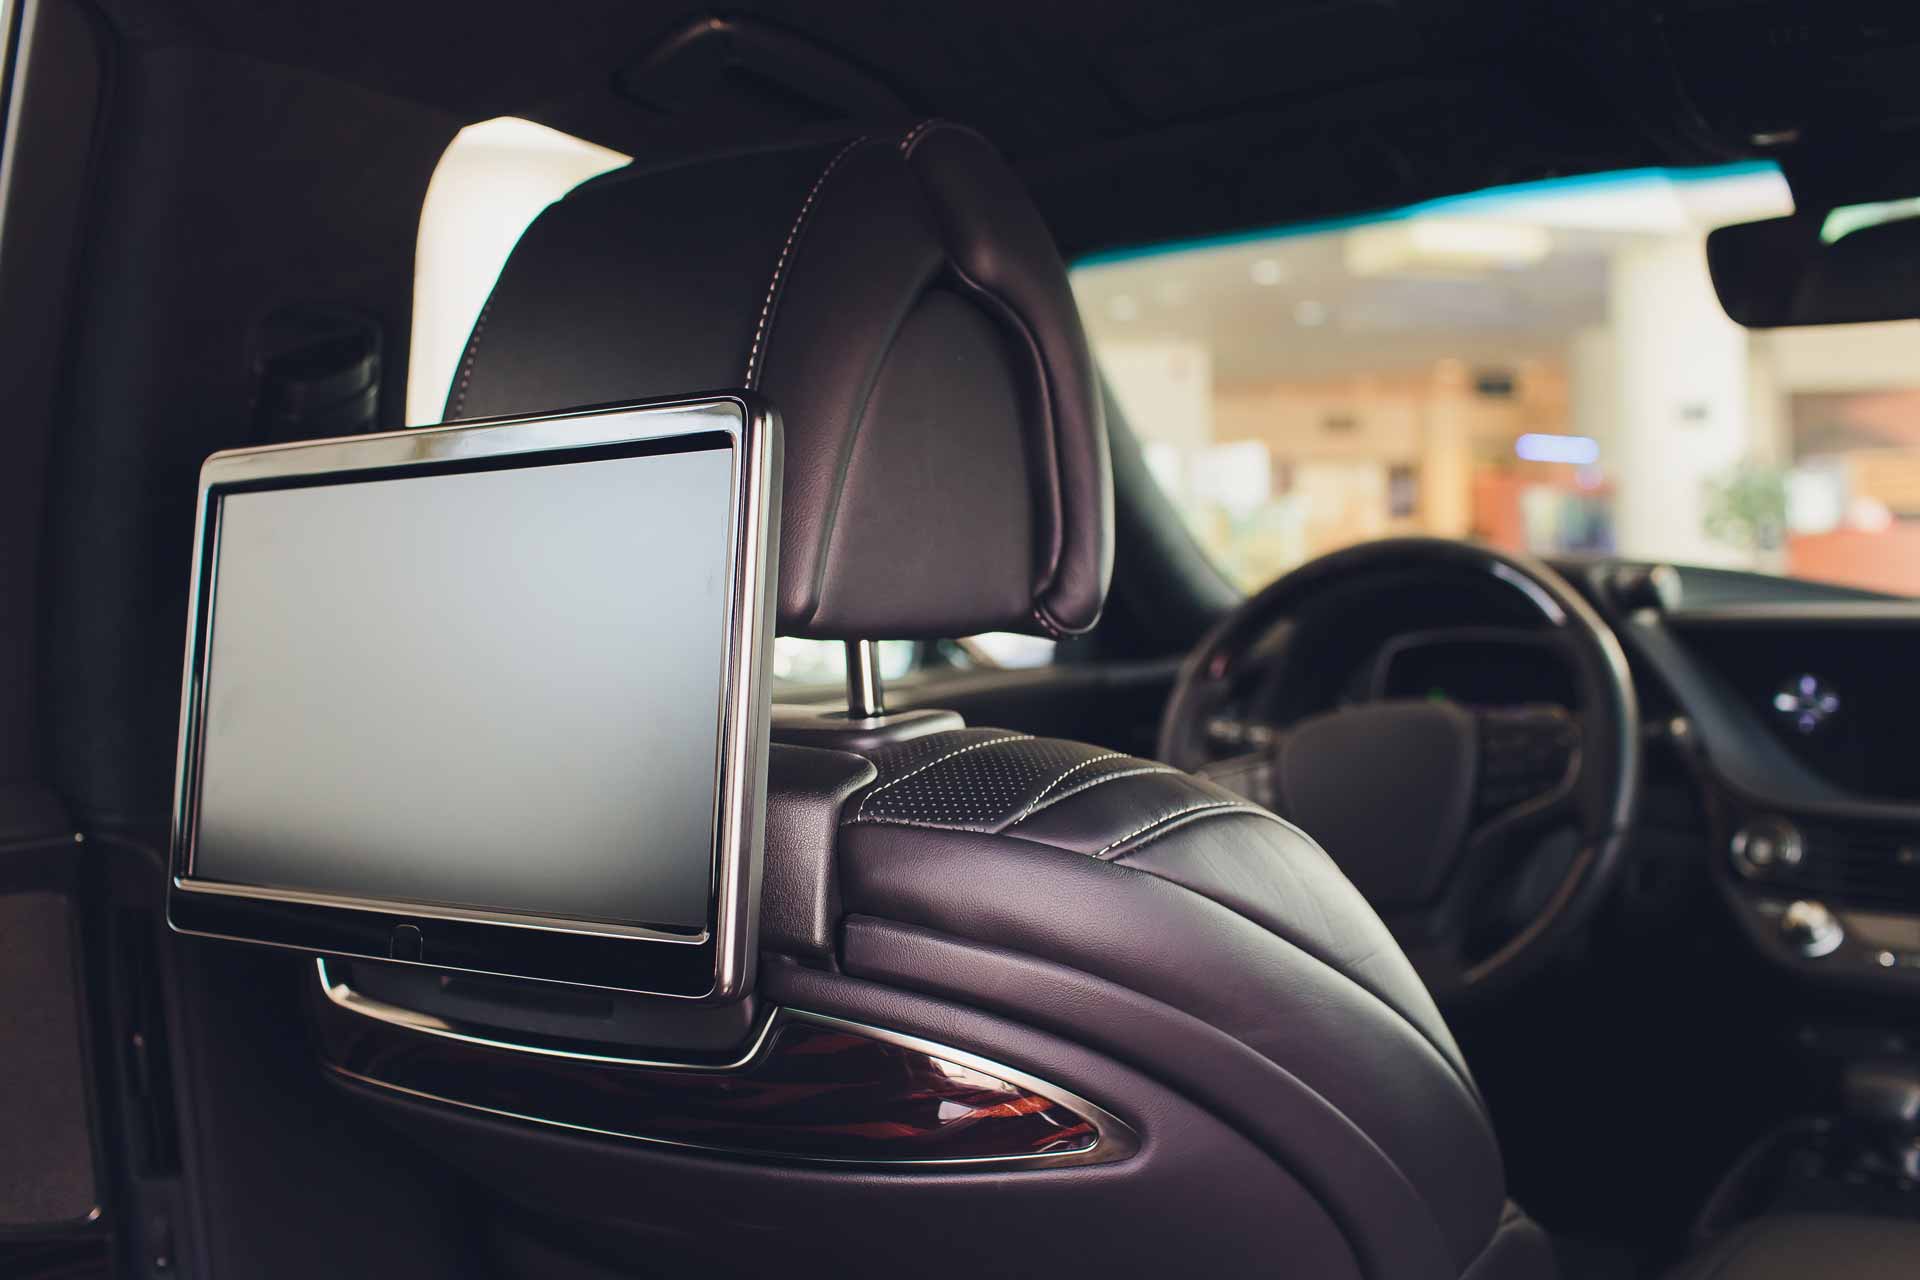 Video screen installed in car behind driver's headrest